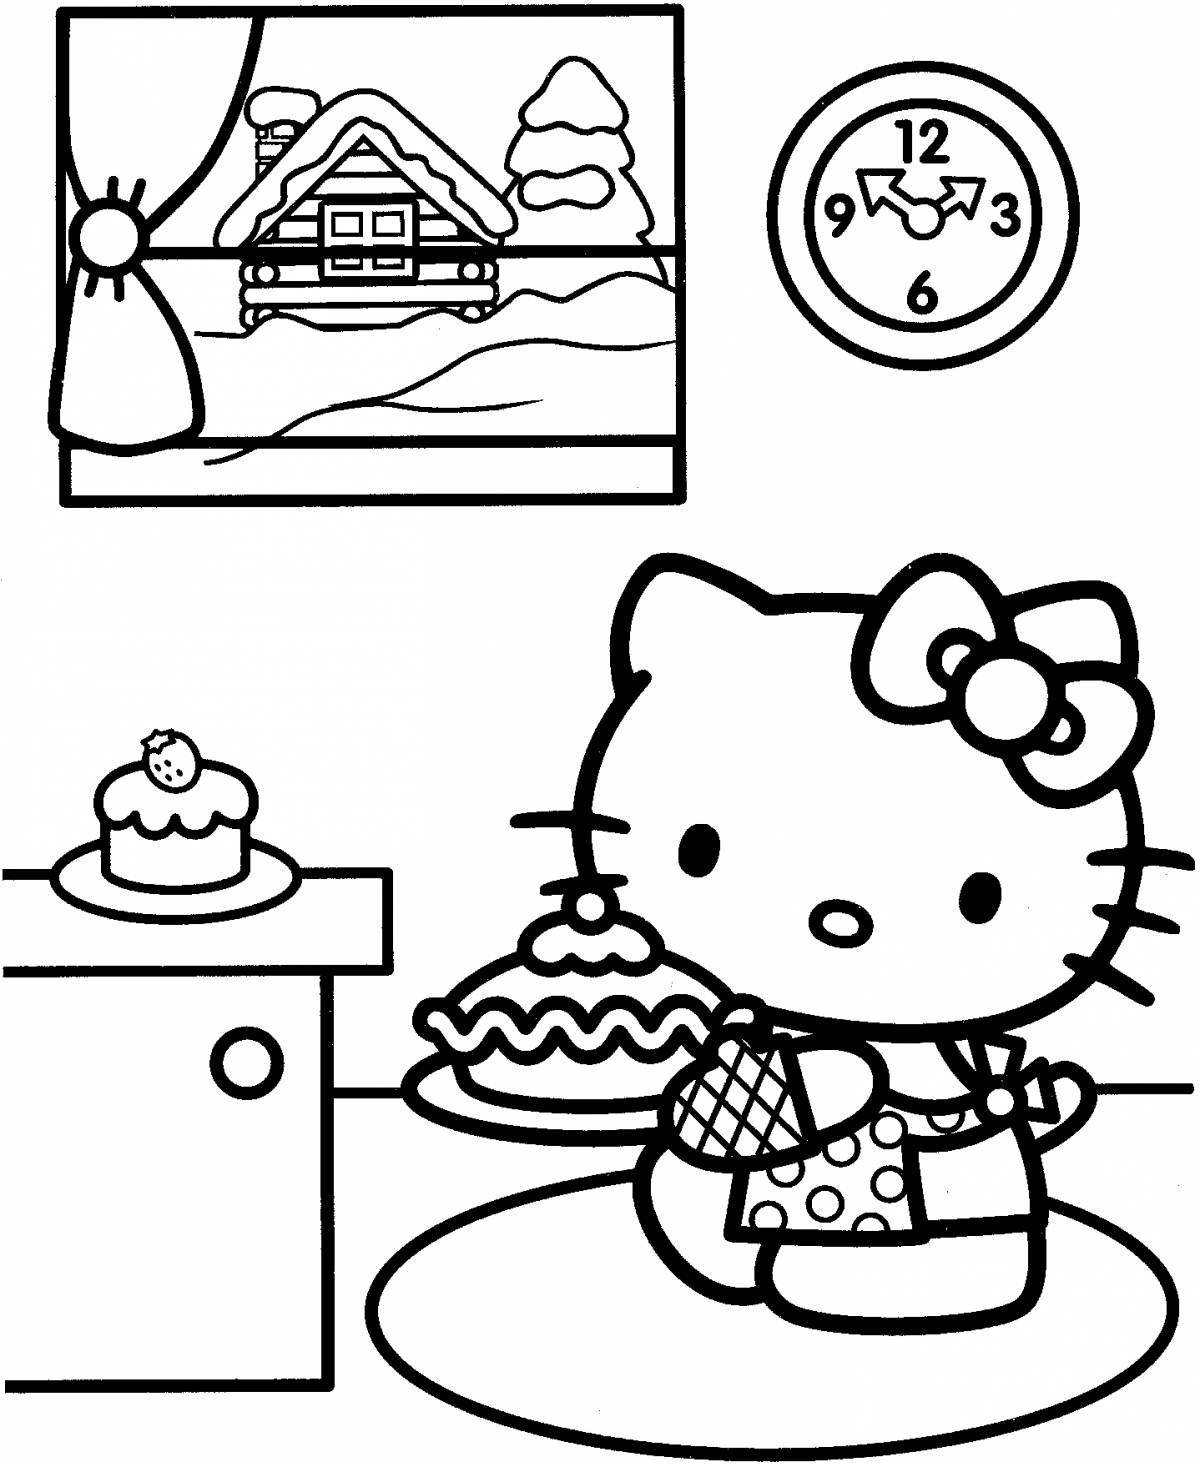 Perfect hello kitty coloring